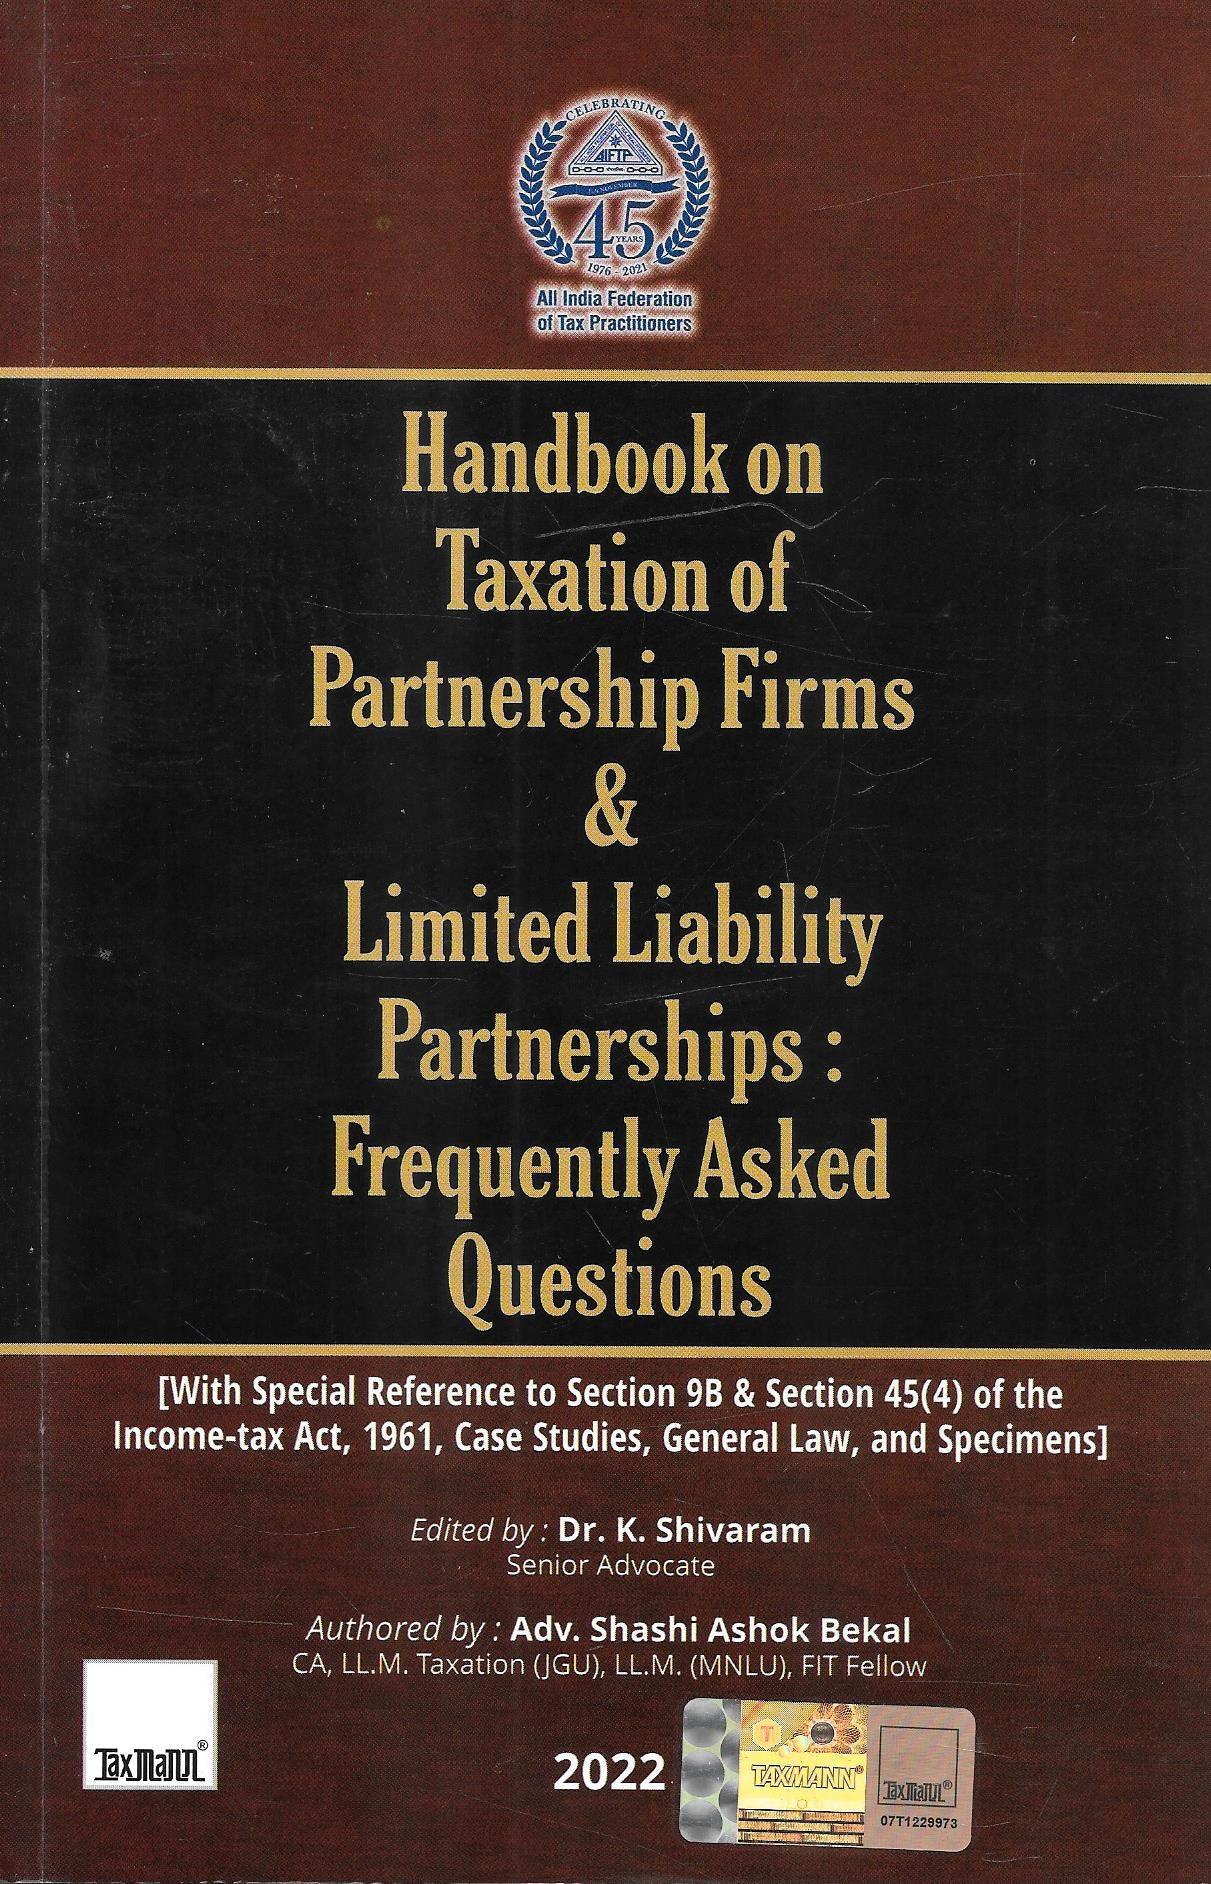 Handbook on Taxation of Partnership Firms & Limited Liability Partnerships: Frequently Asked Questions